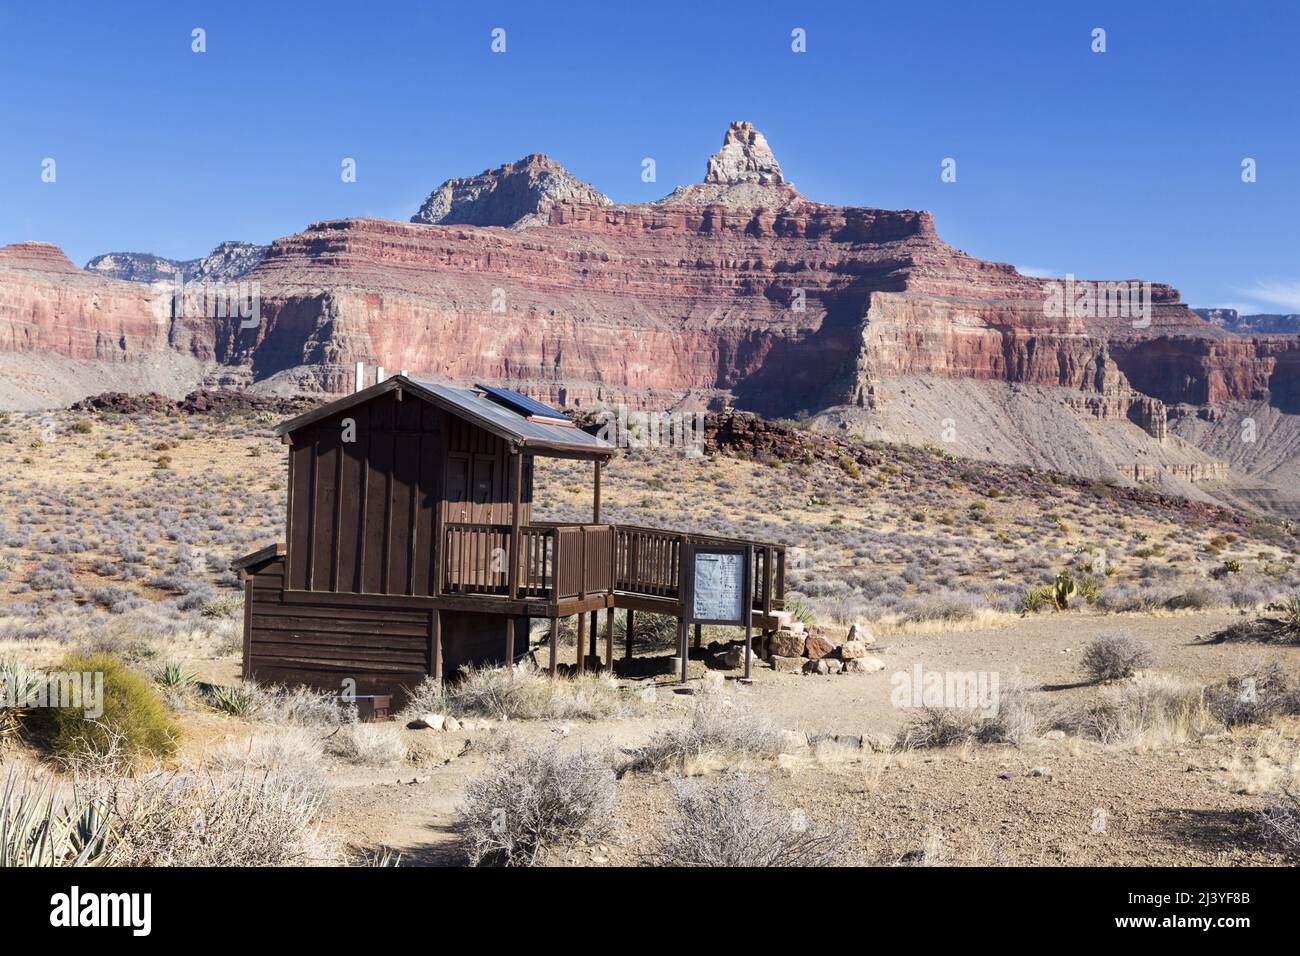 Rustic Outdoor Wooden Outhouse Shelter on South Kaibab Hiking Trail. Scenic Grand Canyon Arizona National Park Red Rock Formations Landscape. Stock Photo